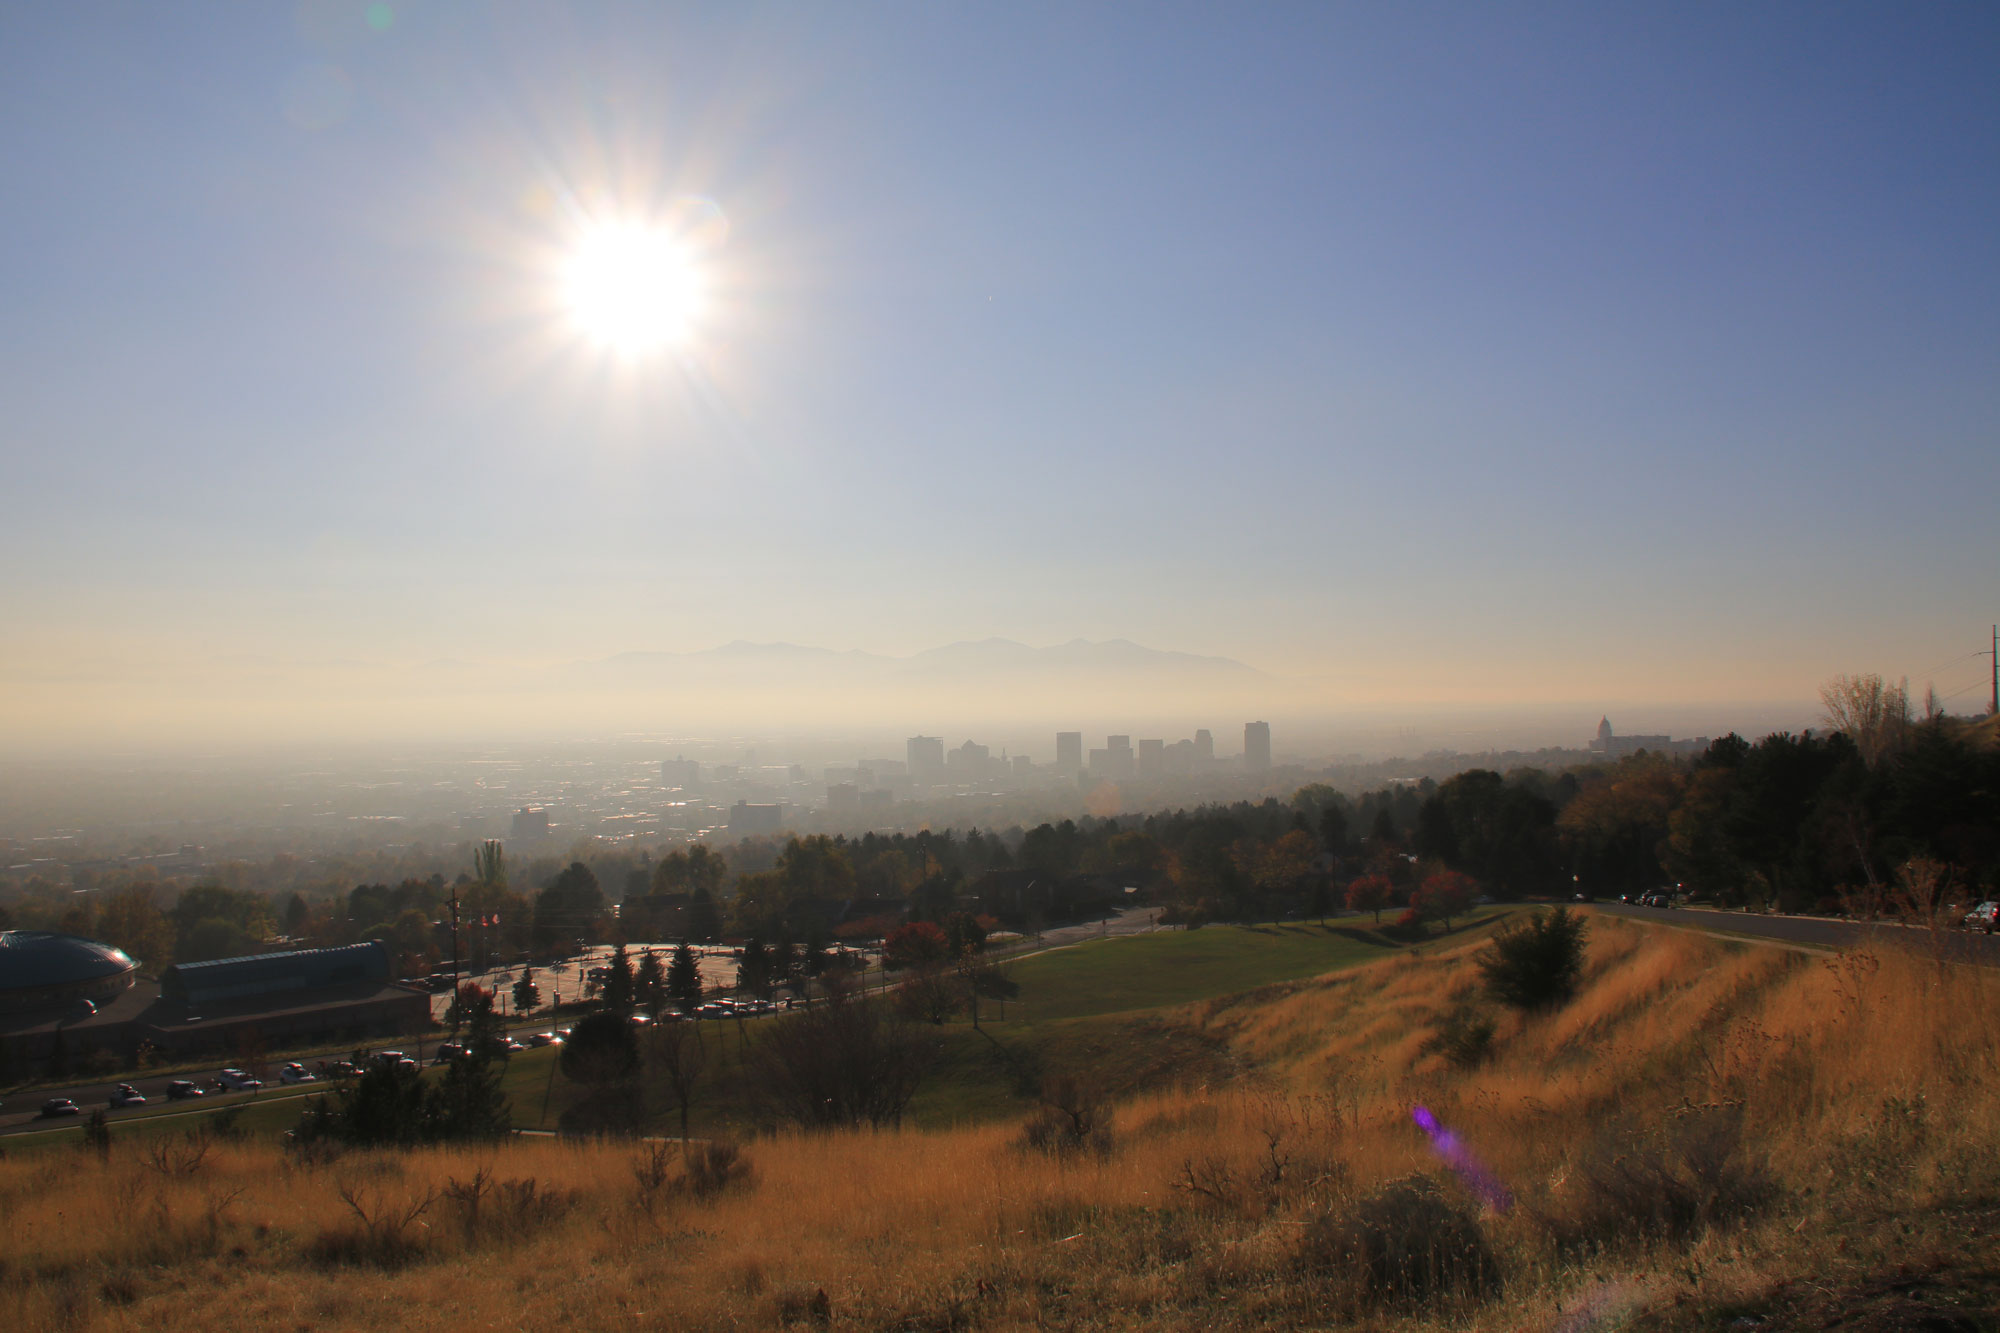 Photograph showing Salt Lake City, barely visible in the distance due to a haze caused by smog.